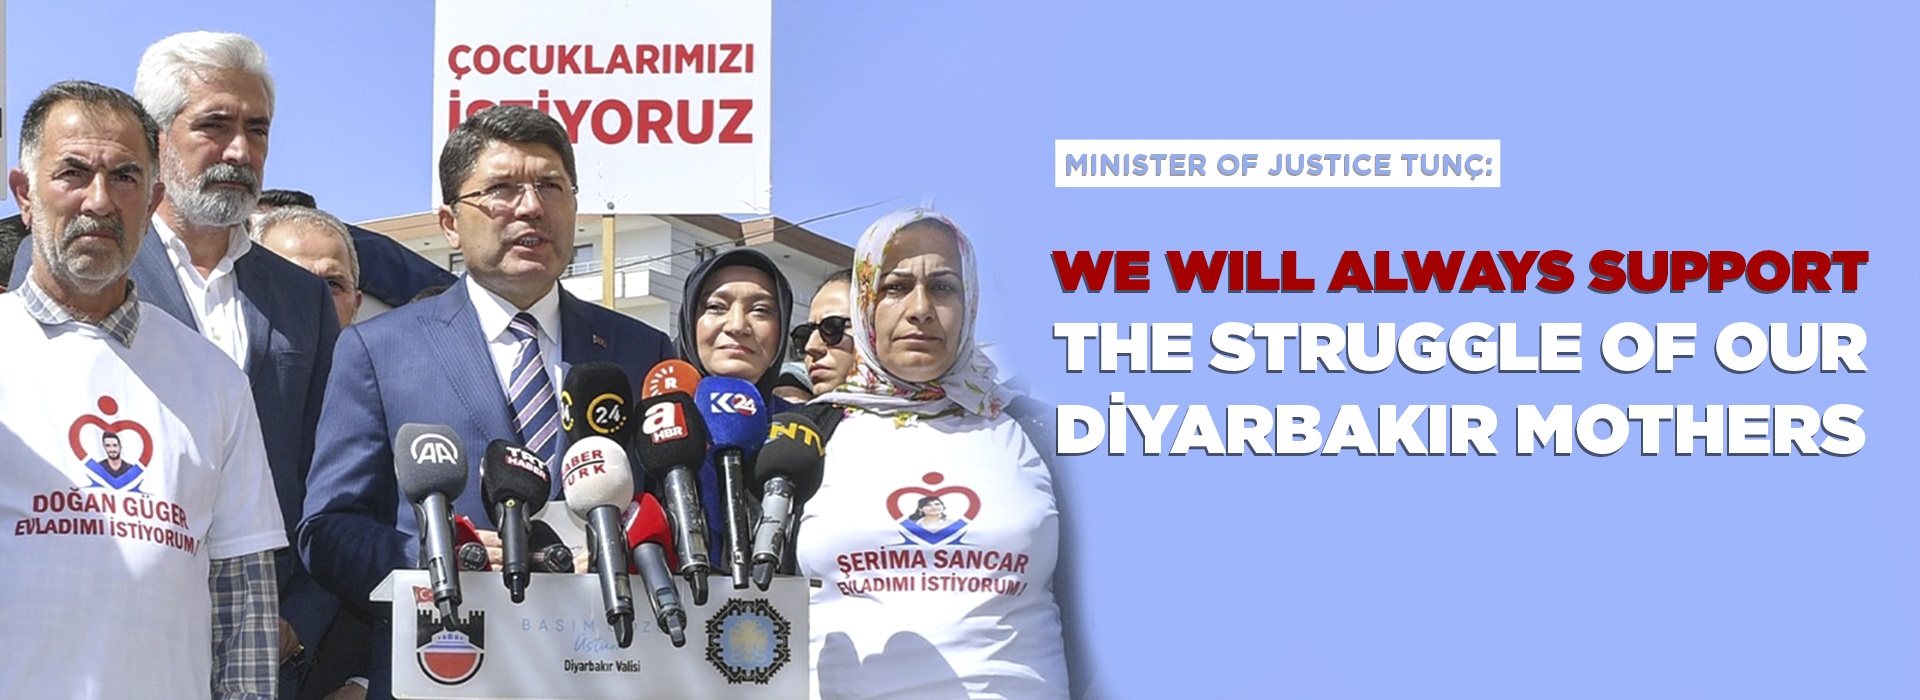 MINISTER OF JUSTICE YILMAZ TUNÇ VISITED DİYARBAKIR MOTHERS